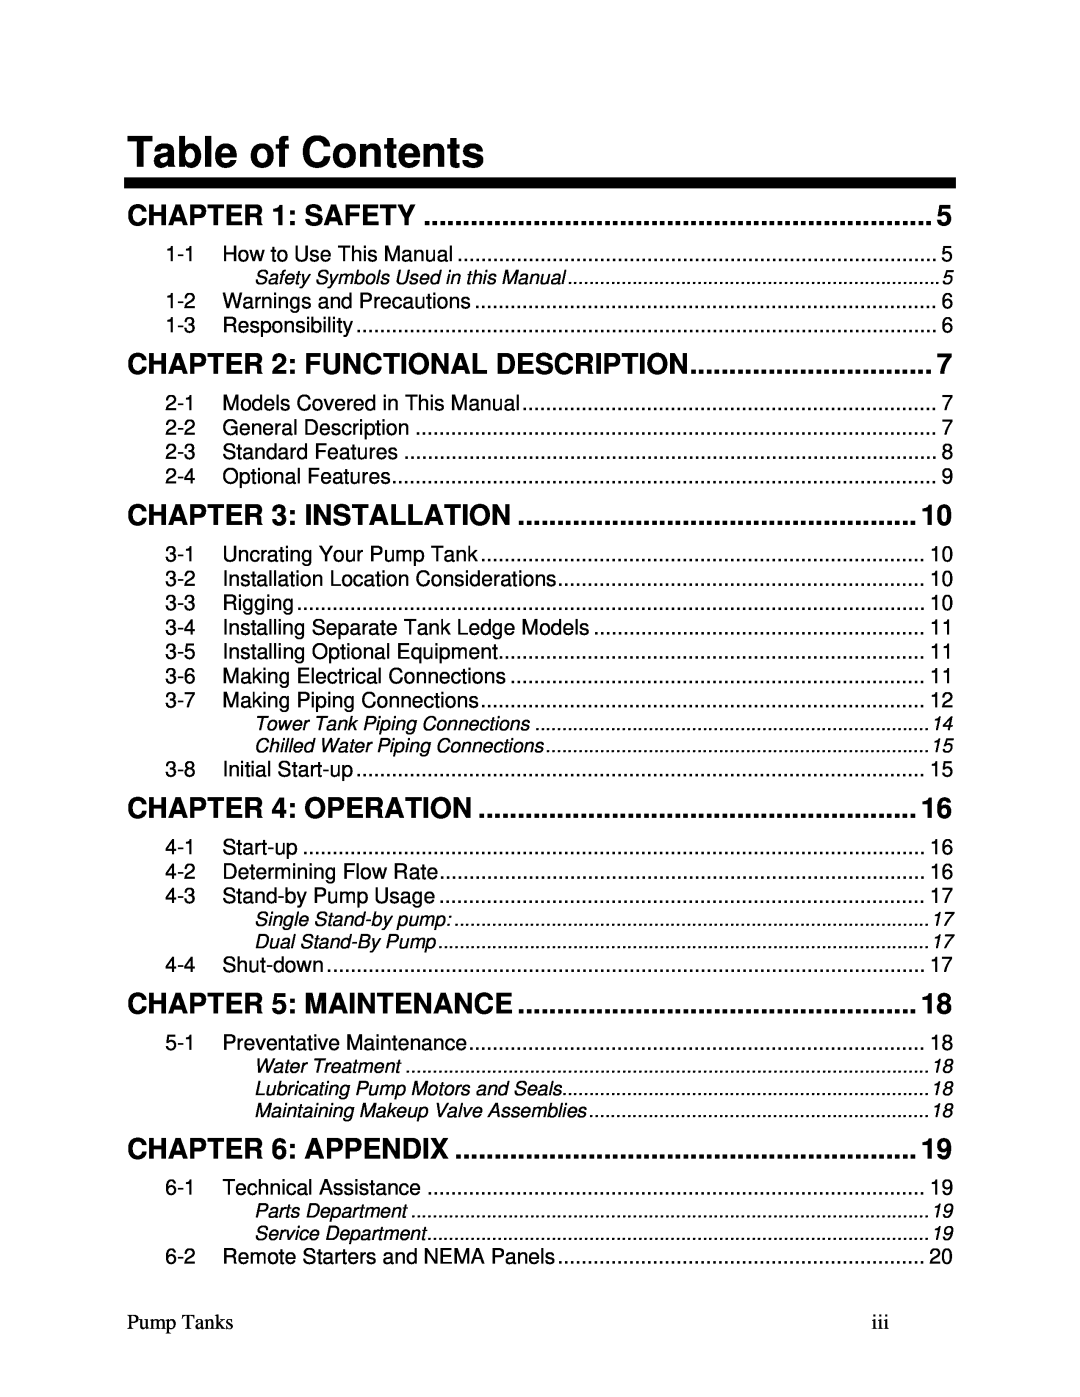 Sterling A0552321 Table of Contents, Safety, Functional Description, Installation, Operation, Maintenance, Appendix 